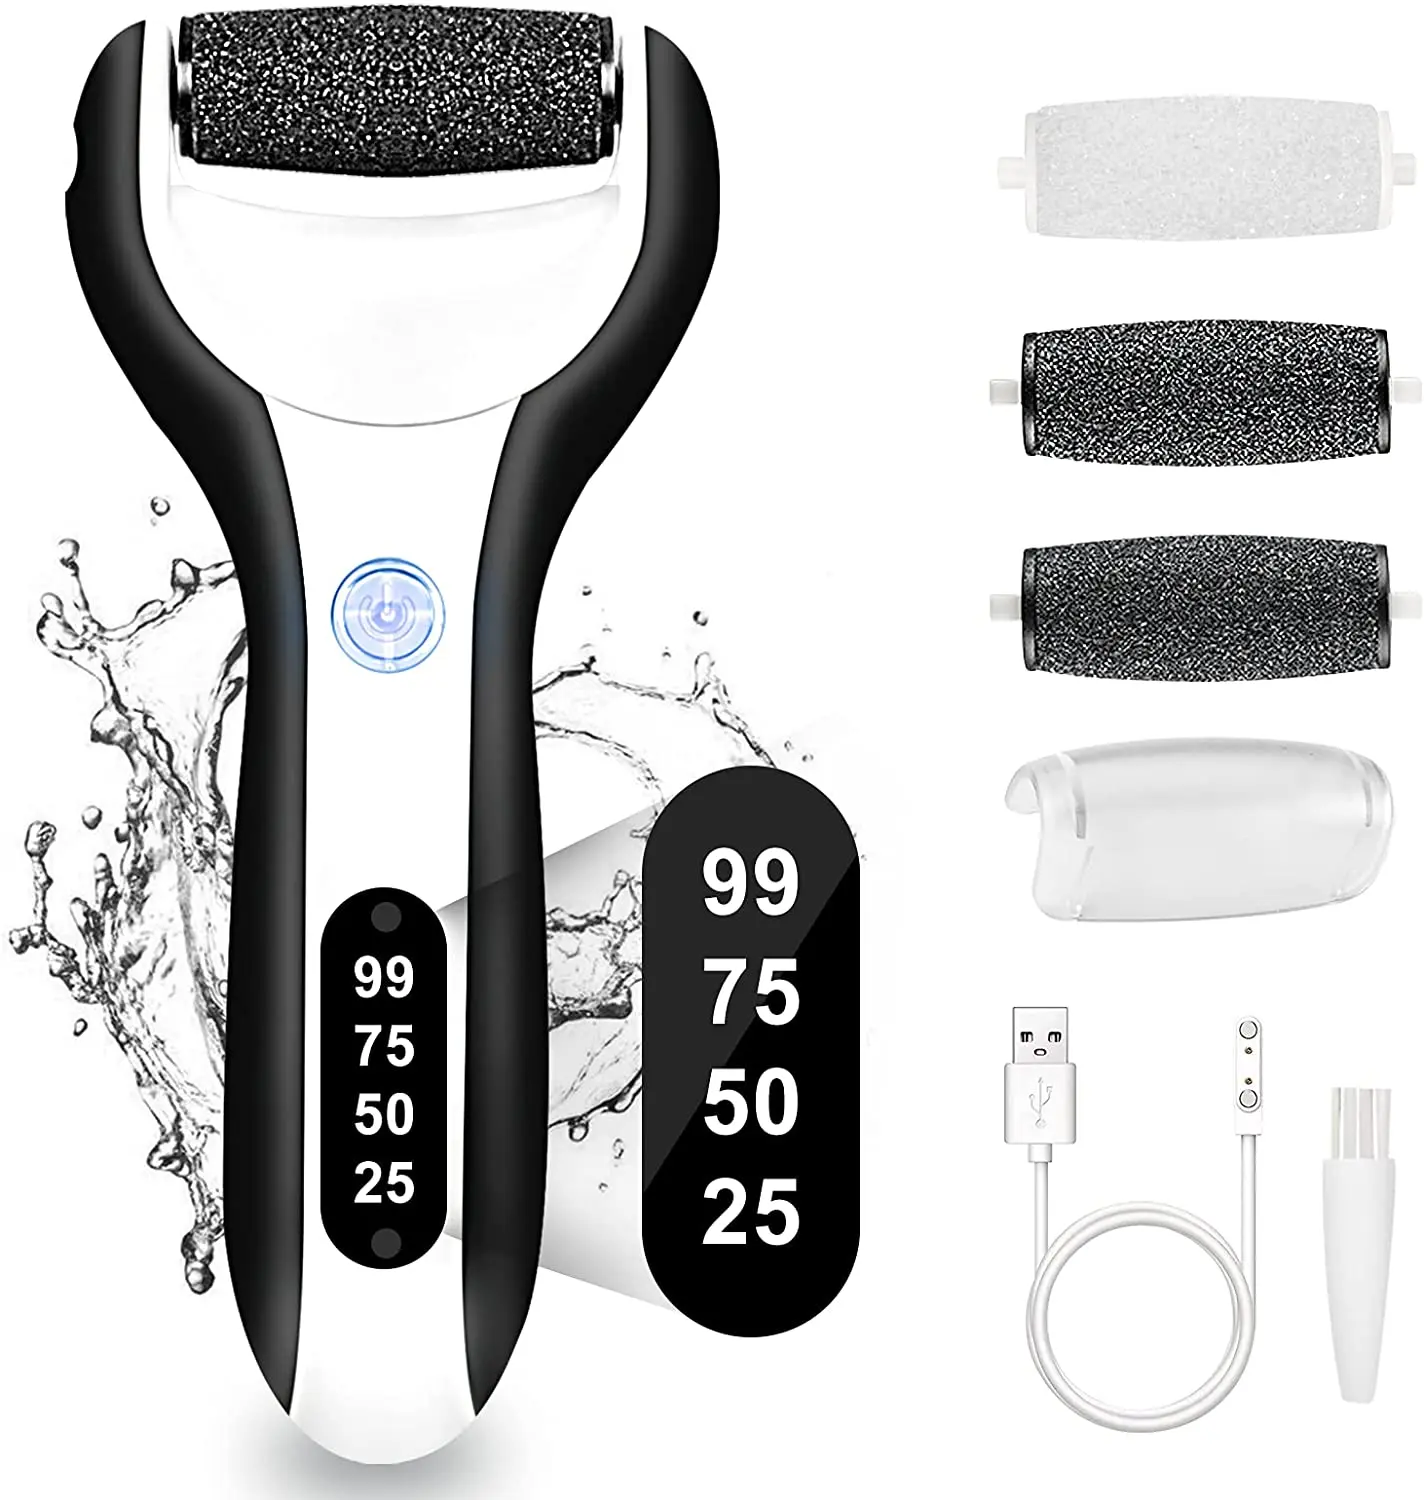 Rechargeable Electric Foot File Callus Remover Machine Pedicure Device Foot Care Tools Feet For Heels Remove Dead Skin black 1pc double sides wooden foot file foot rasp pedicure tools dead skin callus remover